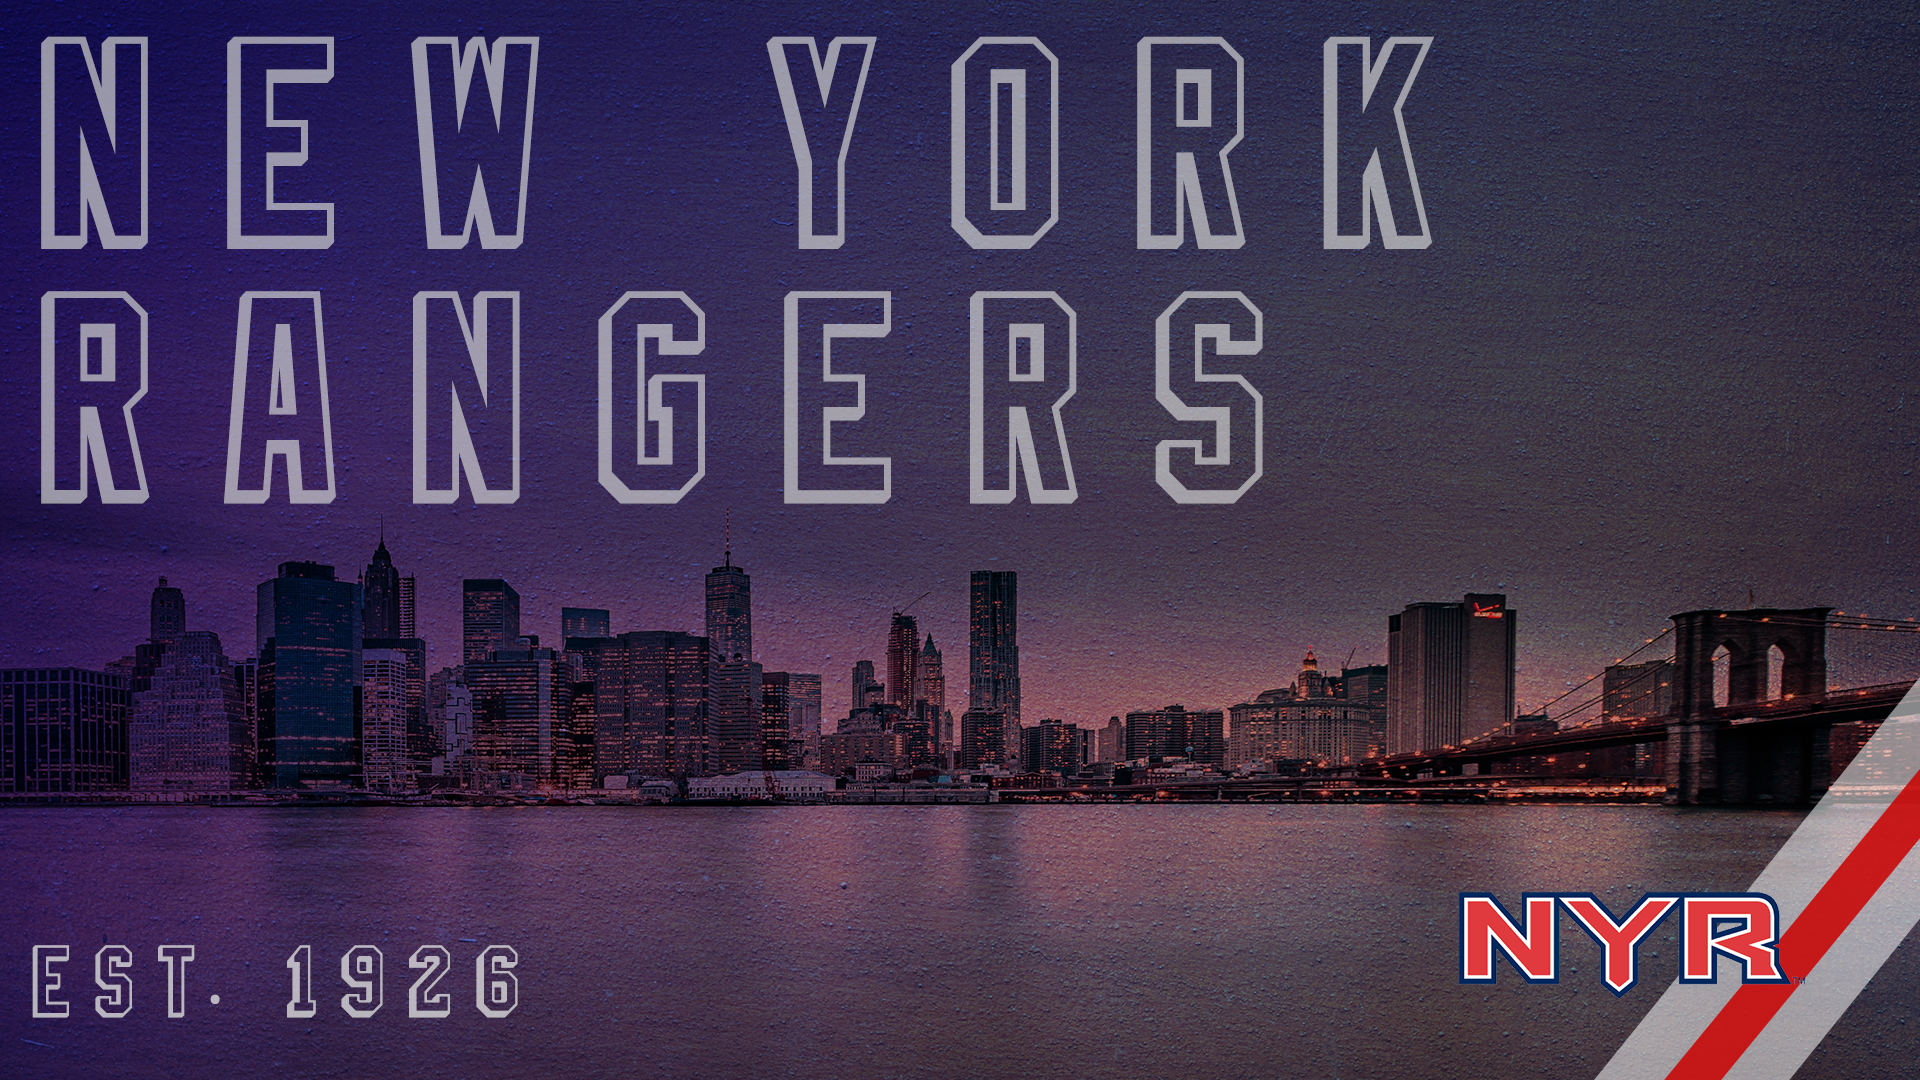 NY Rangers Backgrounds - Wallpaper Cave